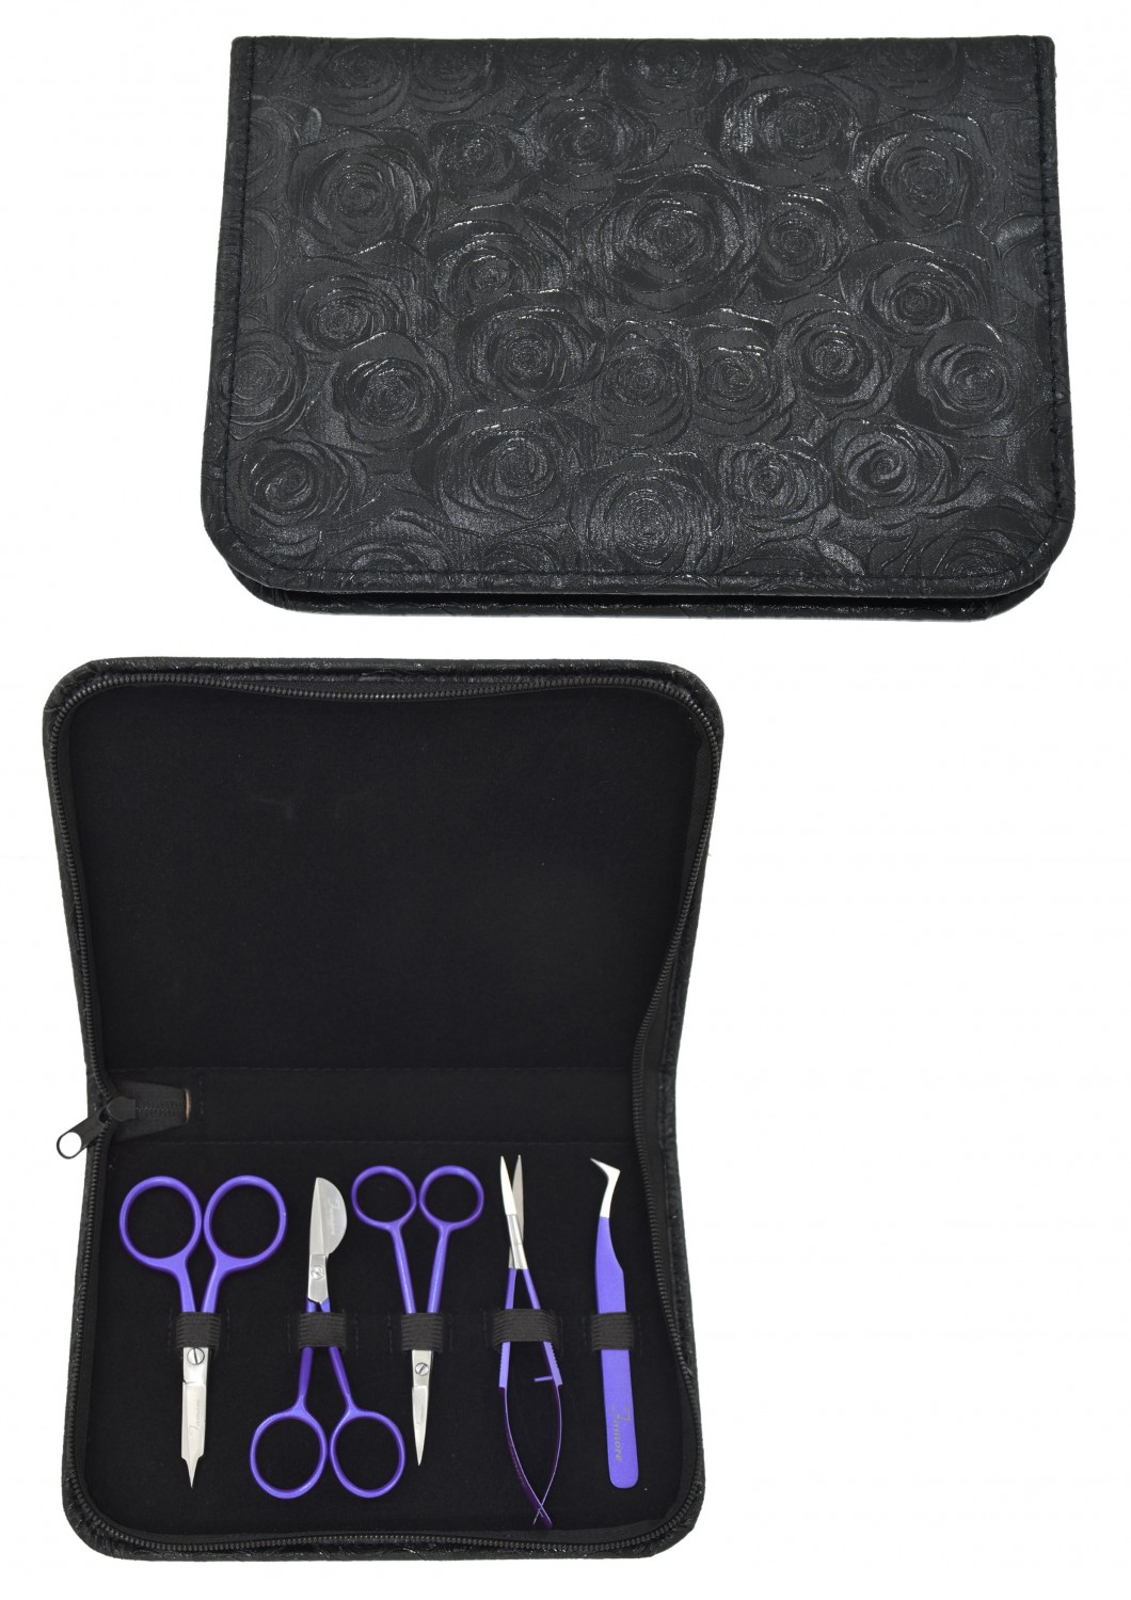 Famore Black Rose Embroidery Tool Kit With Case